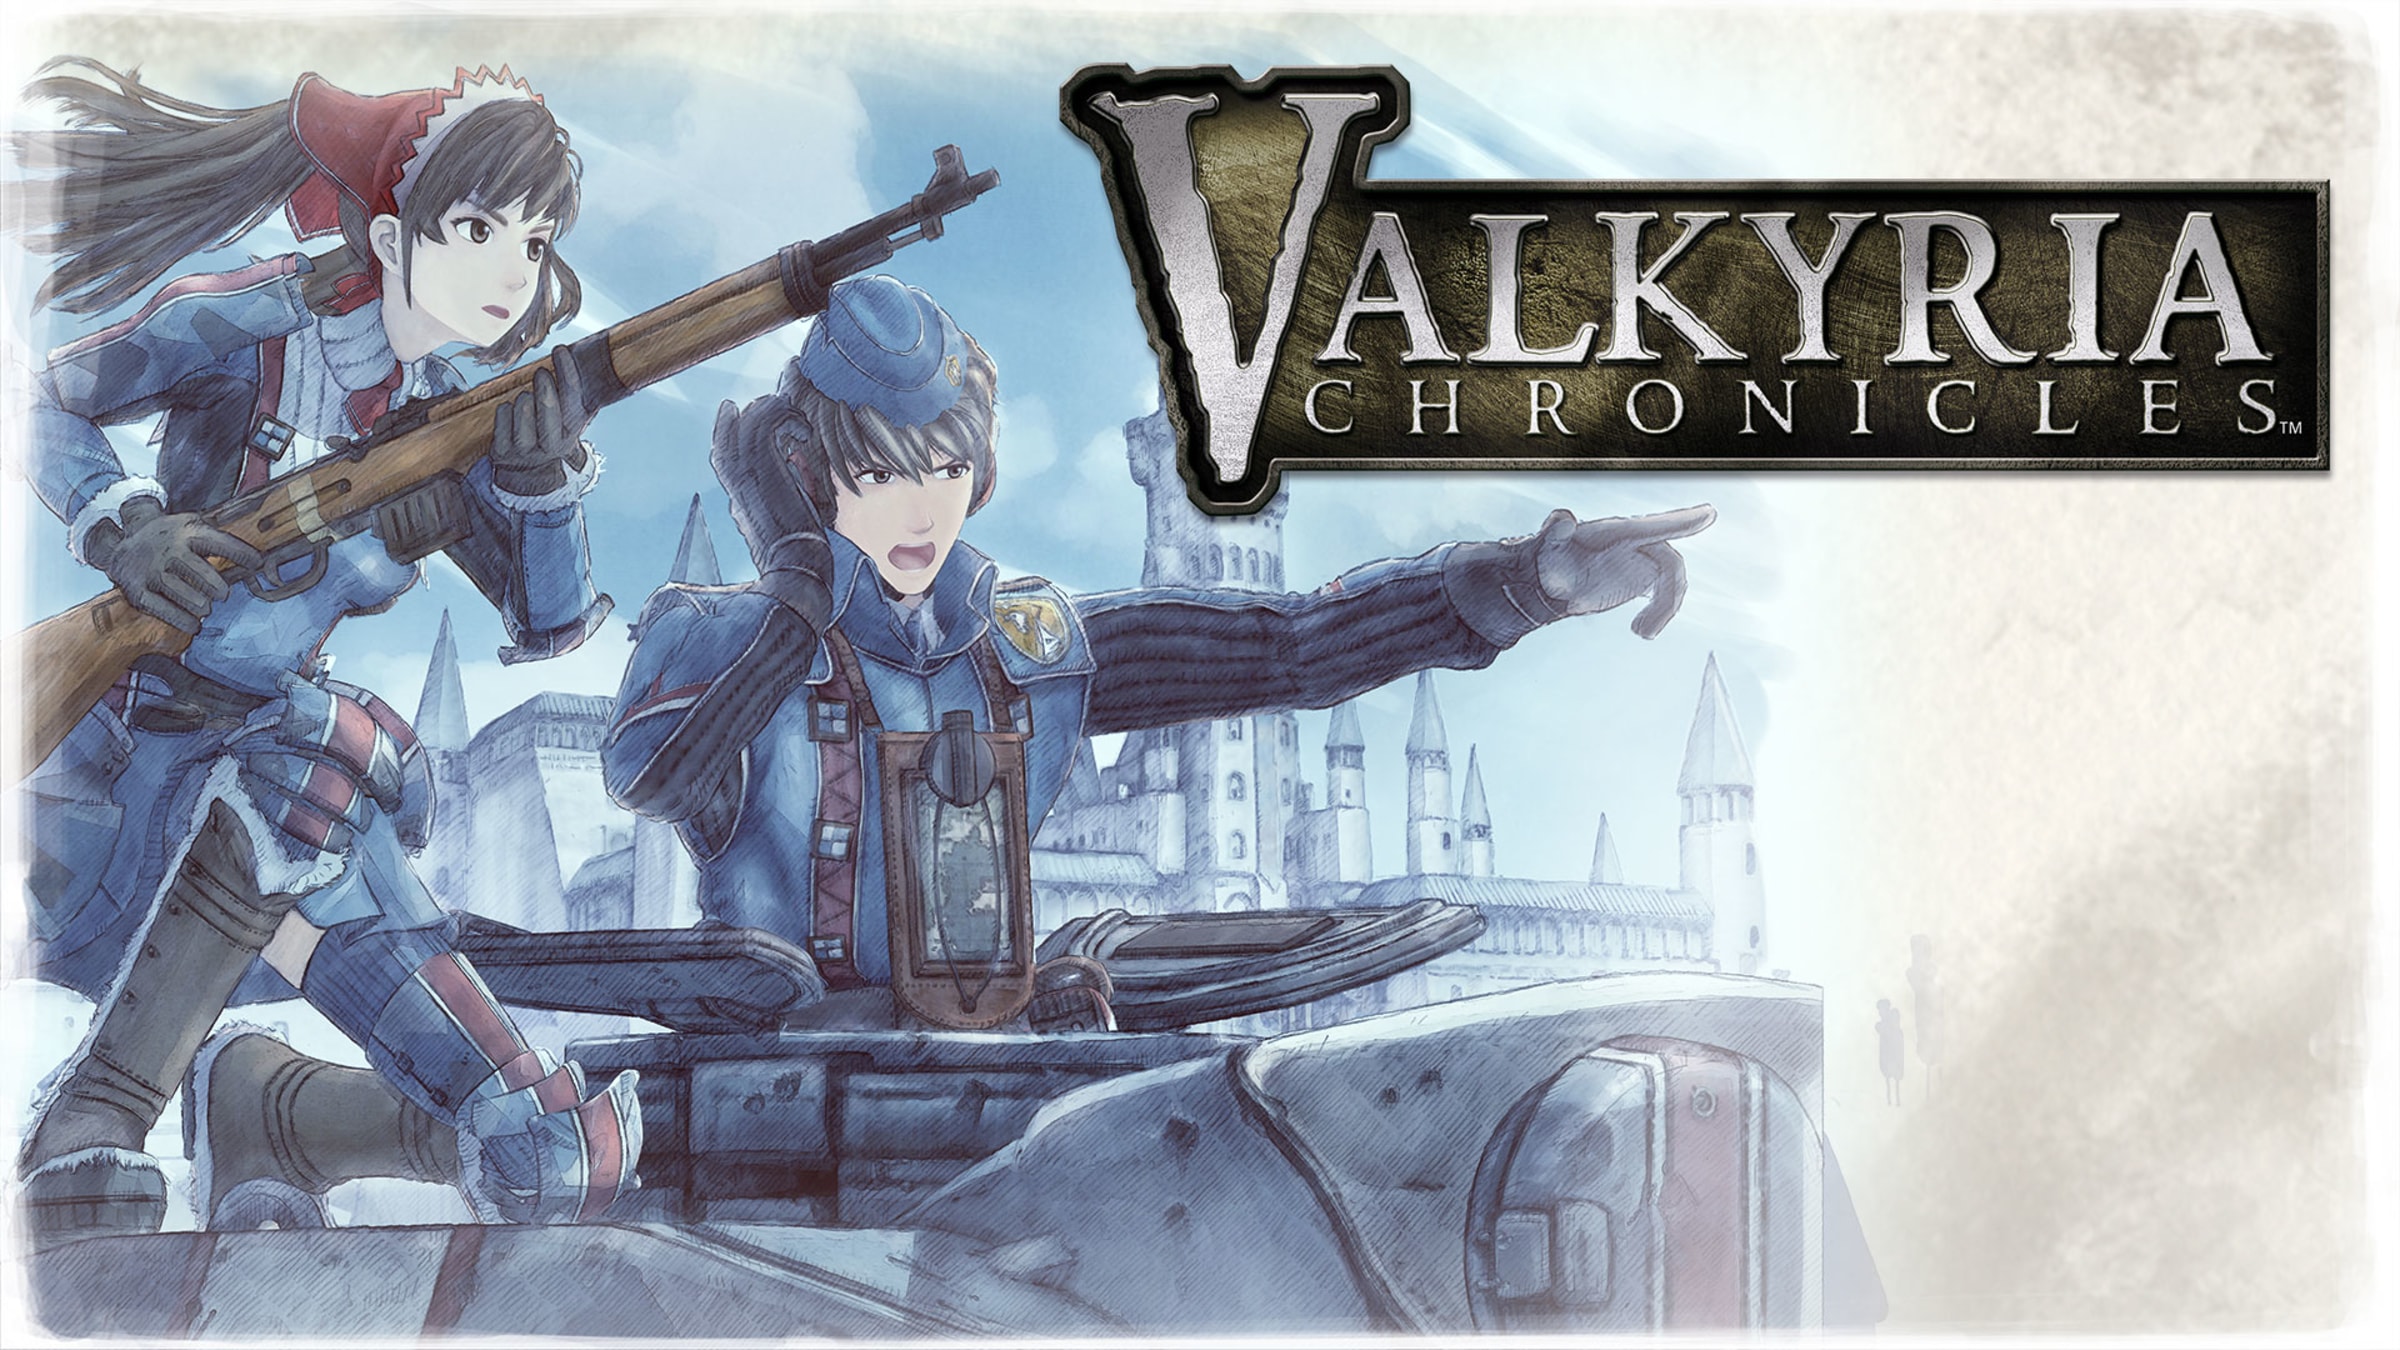 Valkyria Chronicles for Nintendo Switch - Nintendo Official Site